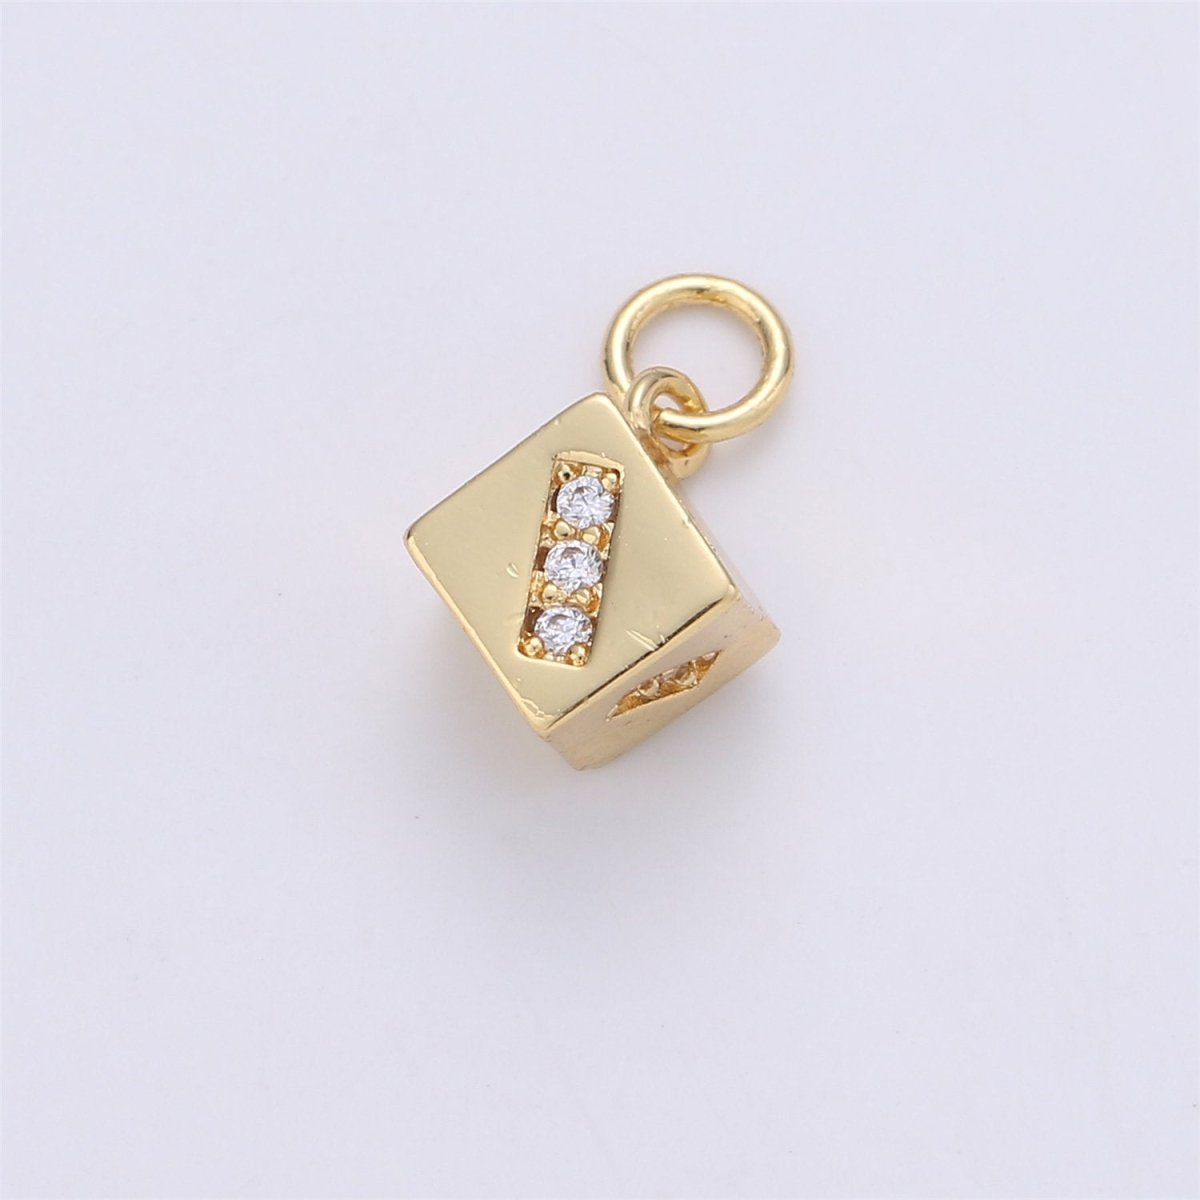 Tiny Dice Pendant Gold Silver Dice Charm Jewelry Craft Supply for necklace earring Bracelet Component C-918, C-426 - DLUXCA